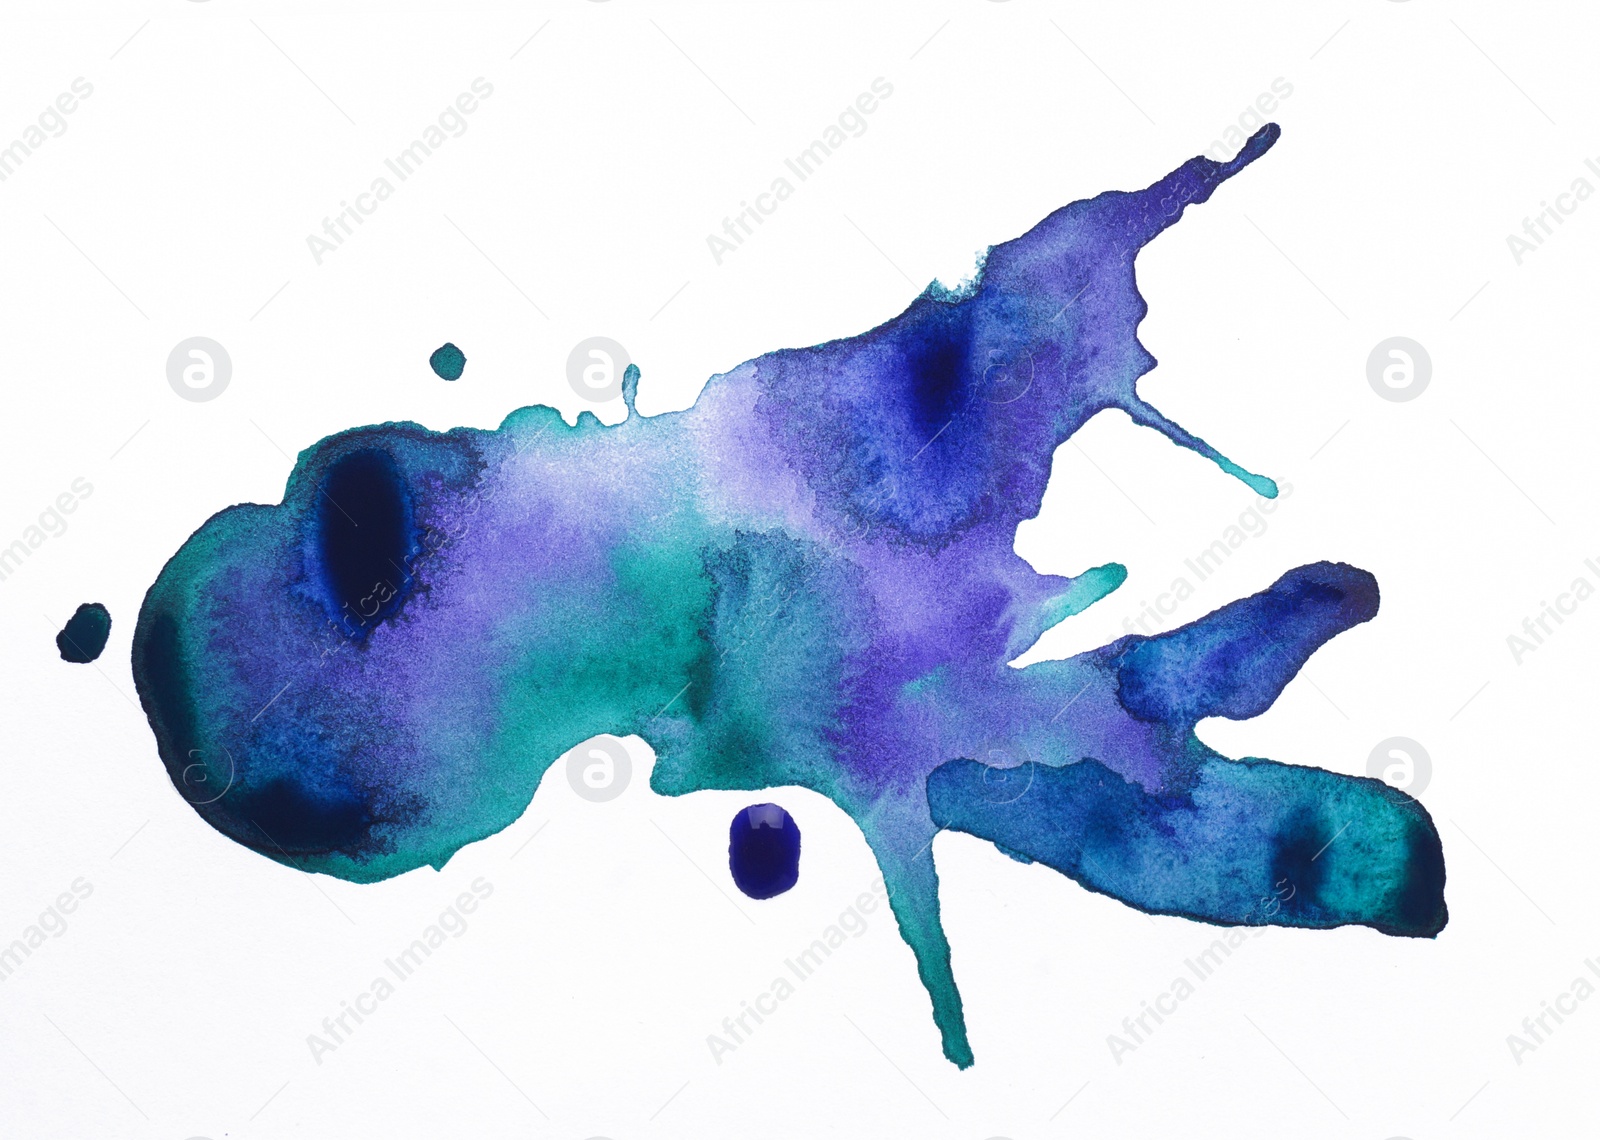 Photo of Blots of colorful watercolor paint on white paper, top view